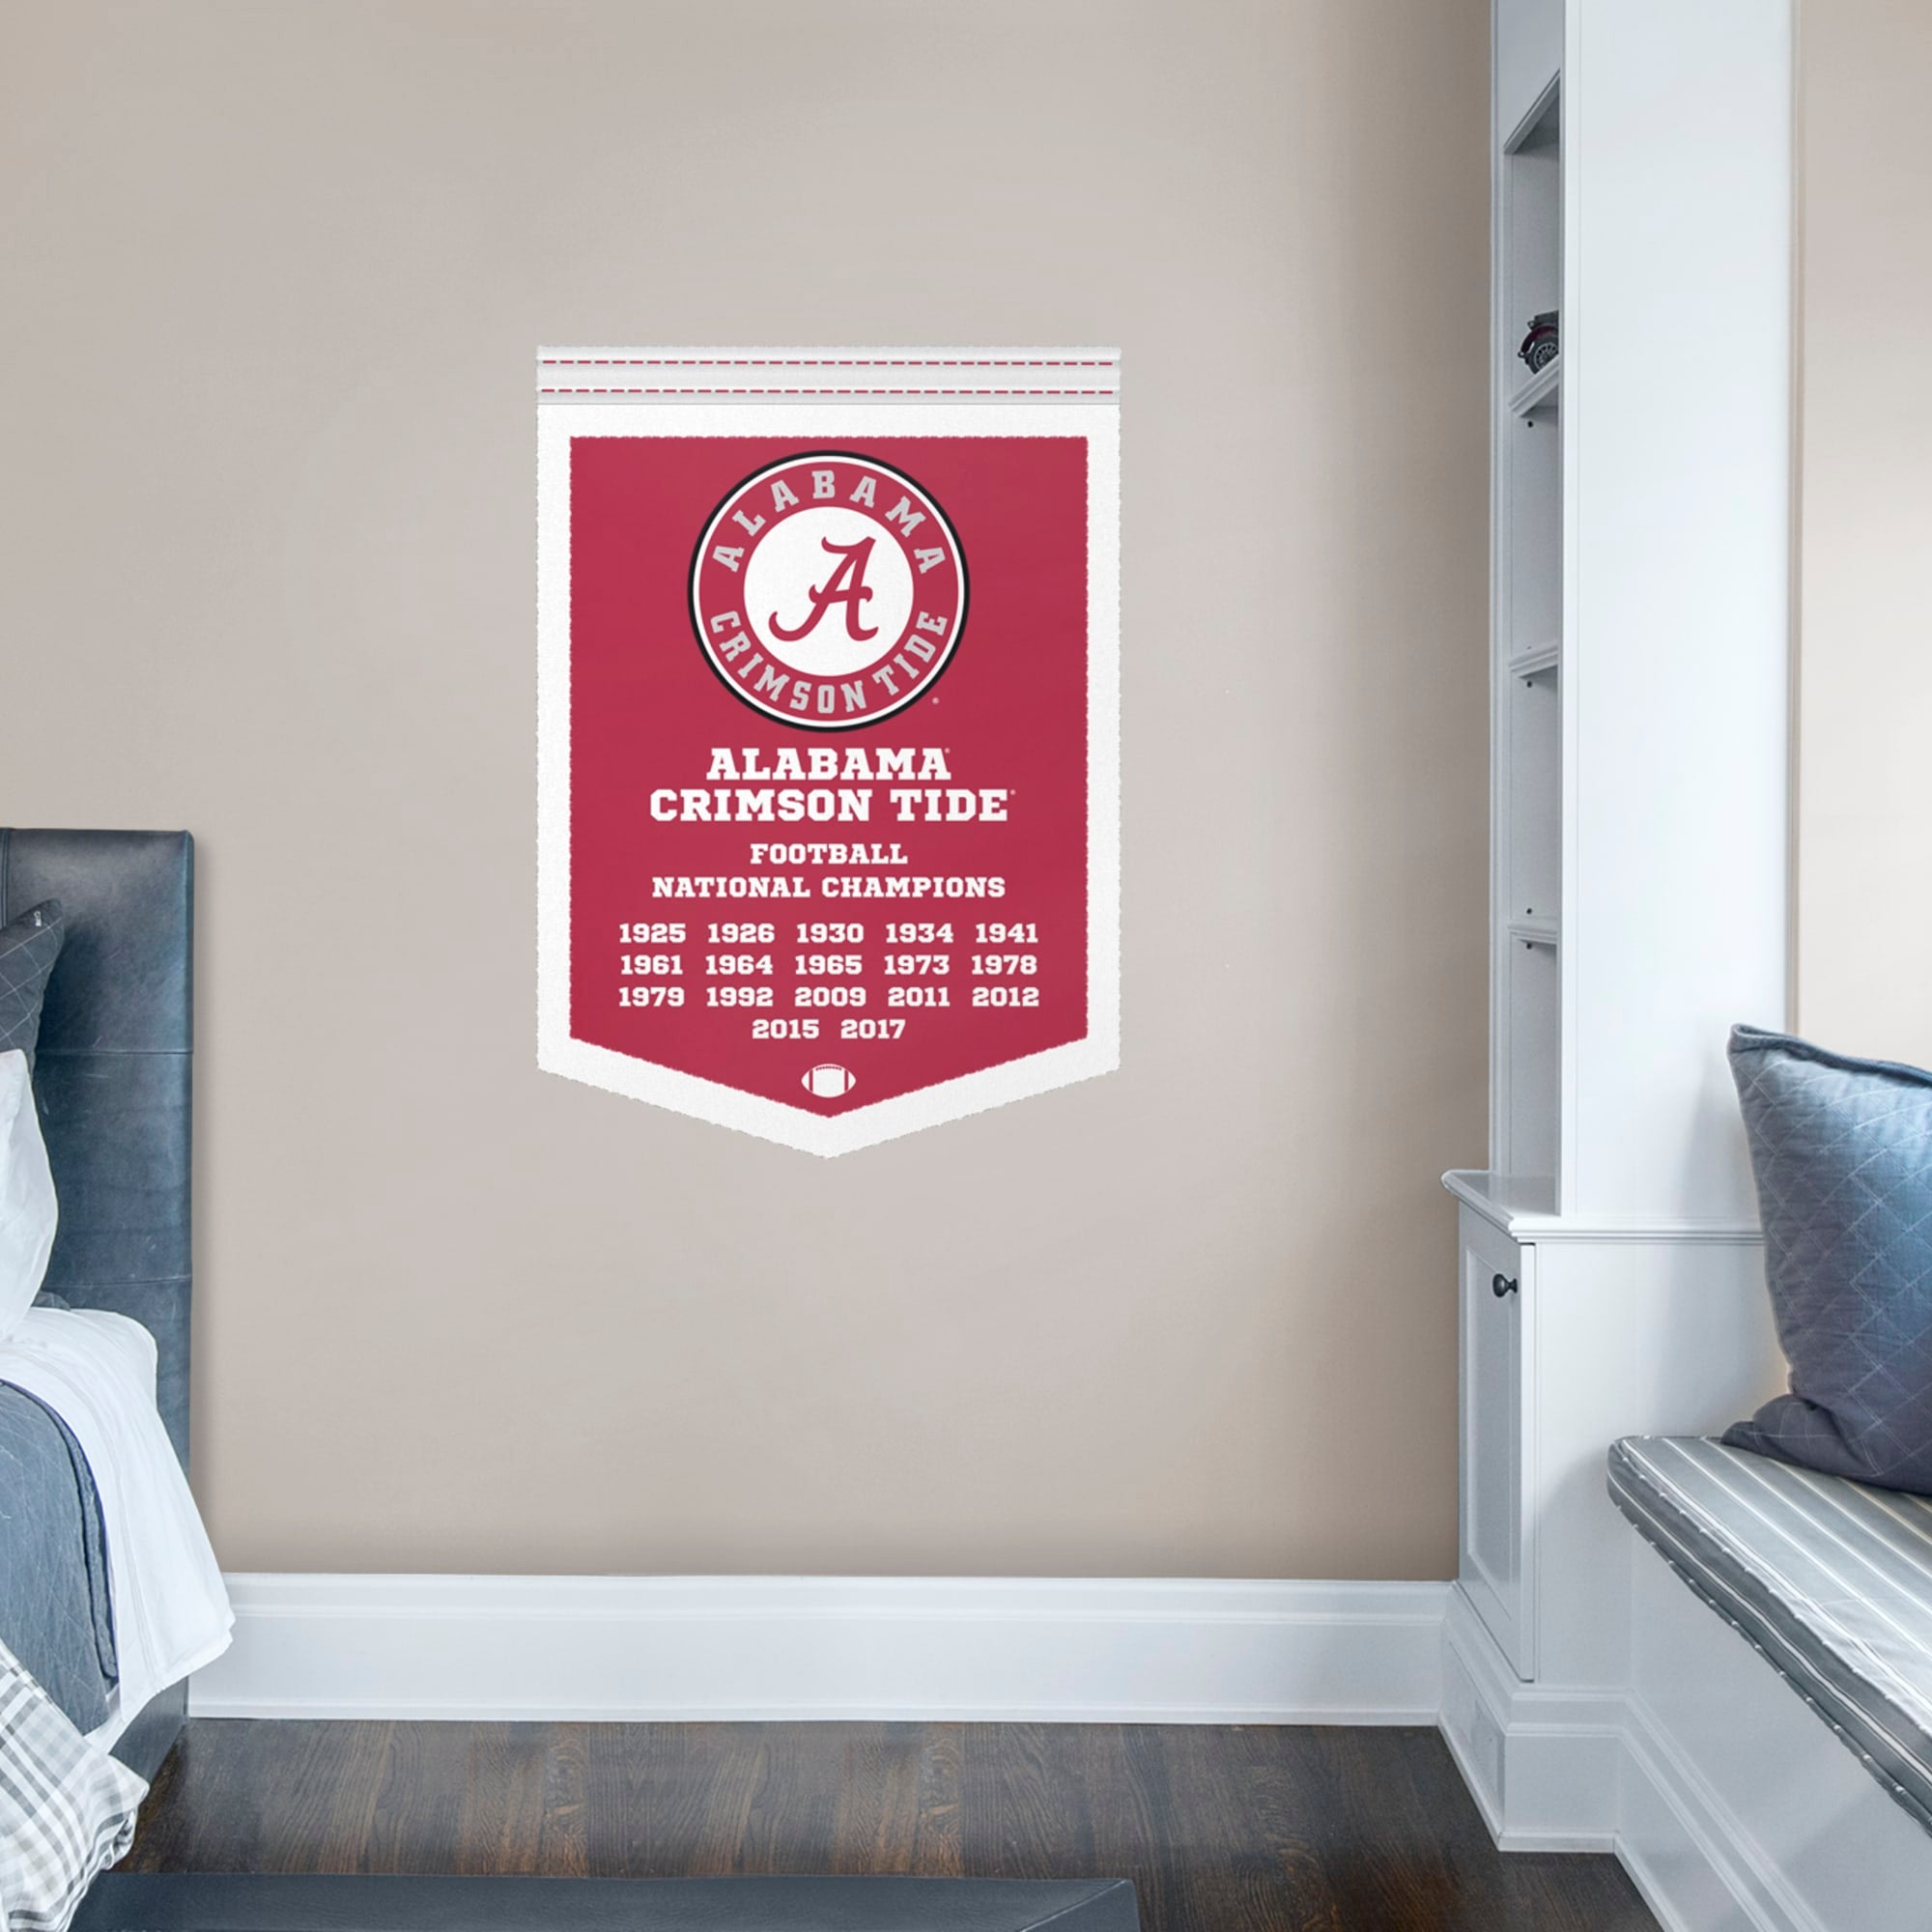 Alabama Crimson Tide: Football Championships Banner - Officially Licensed Removable Wall Decal 34.0"W x 48.0"H by Fathead | Viny